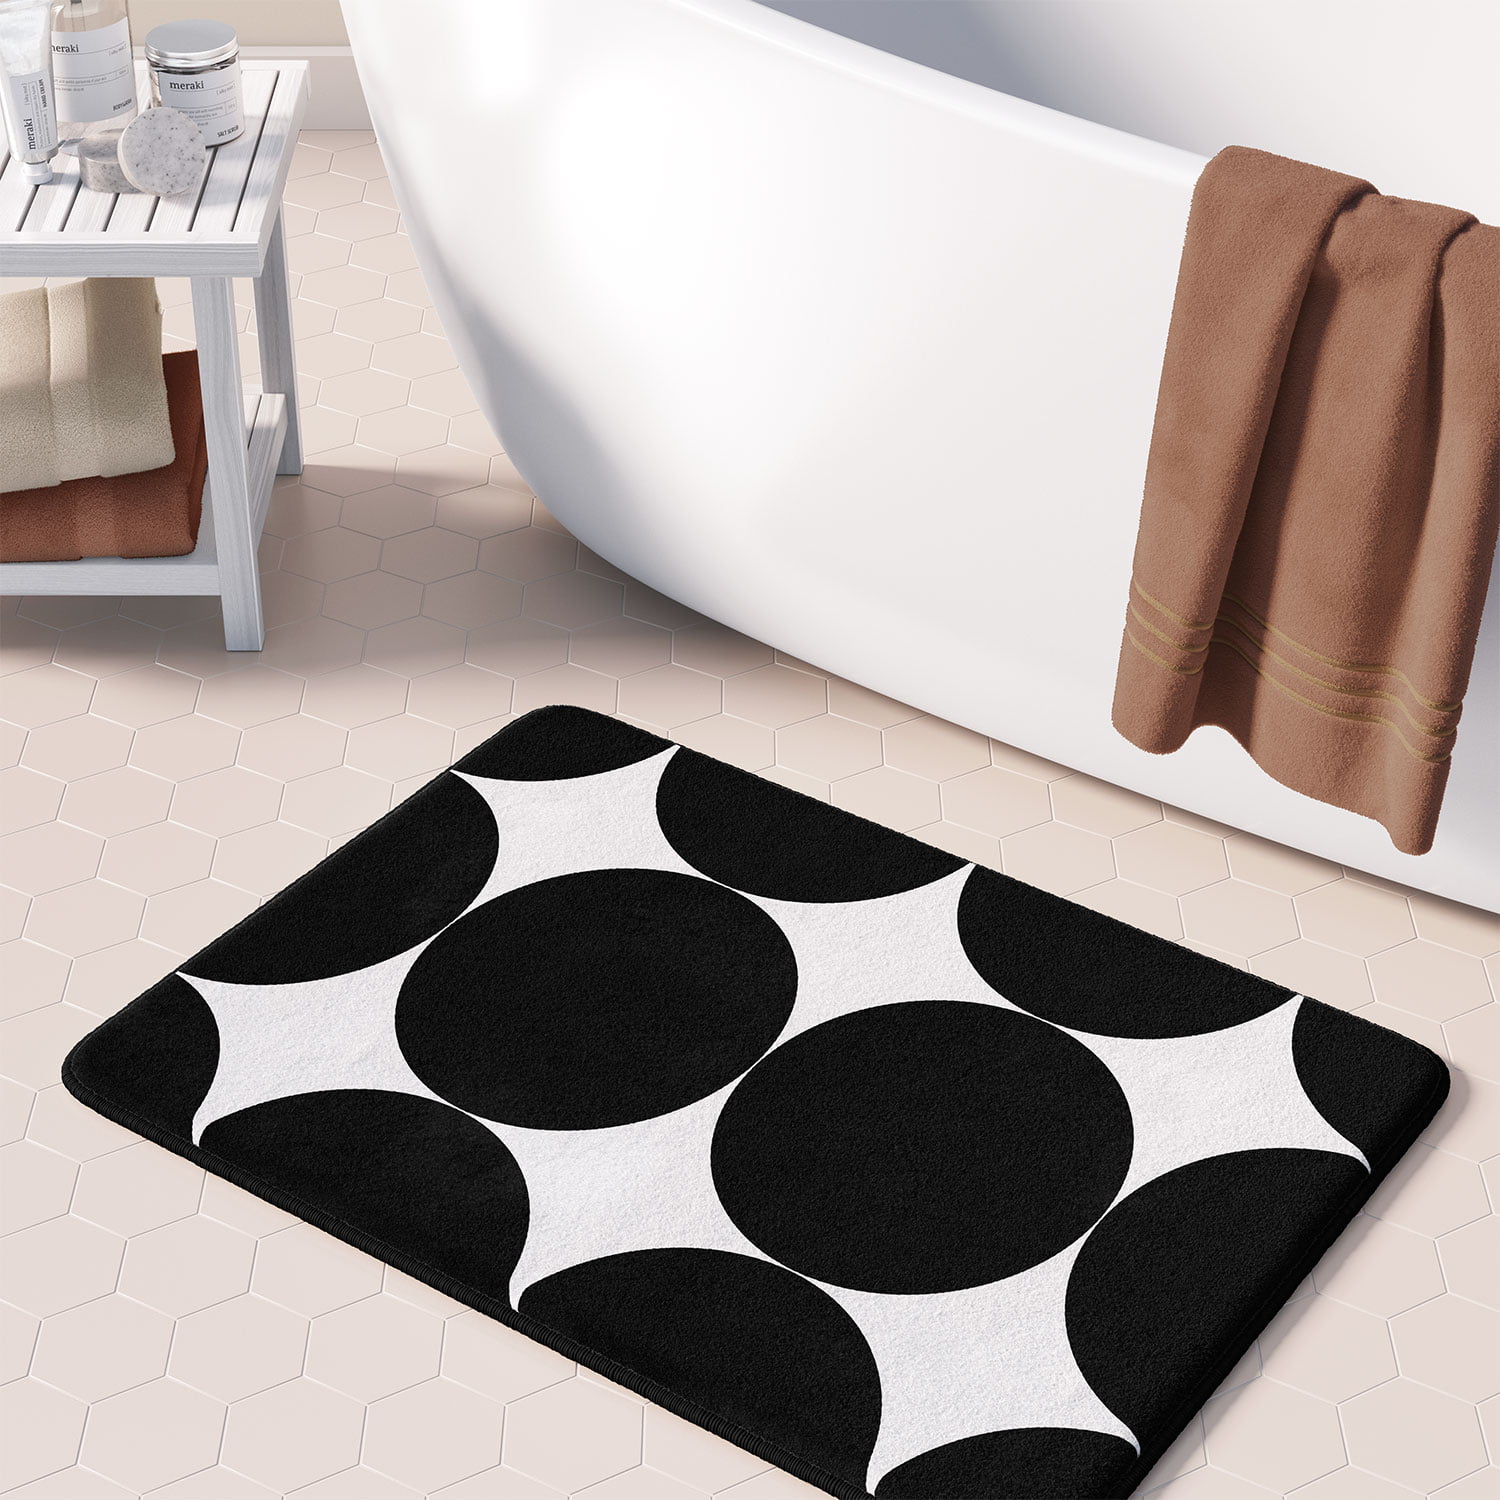 Black and white patterned bath mat with big bold black circles.